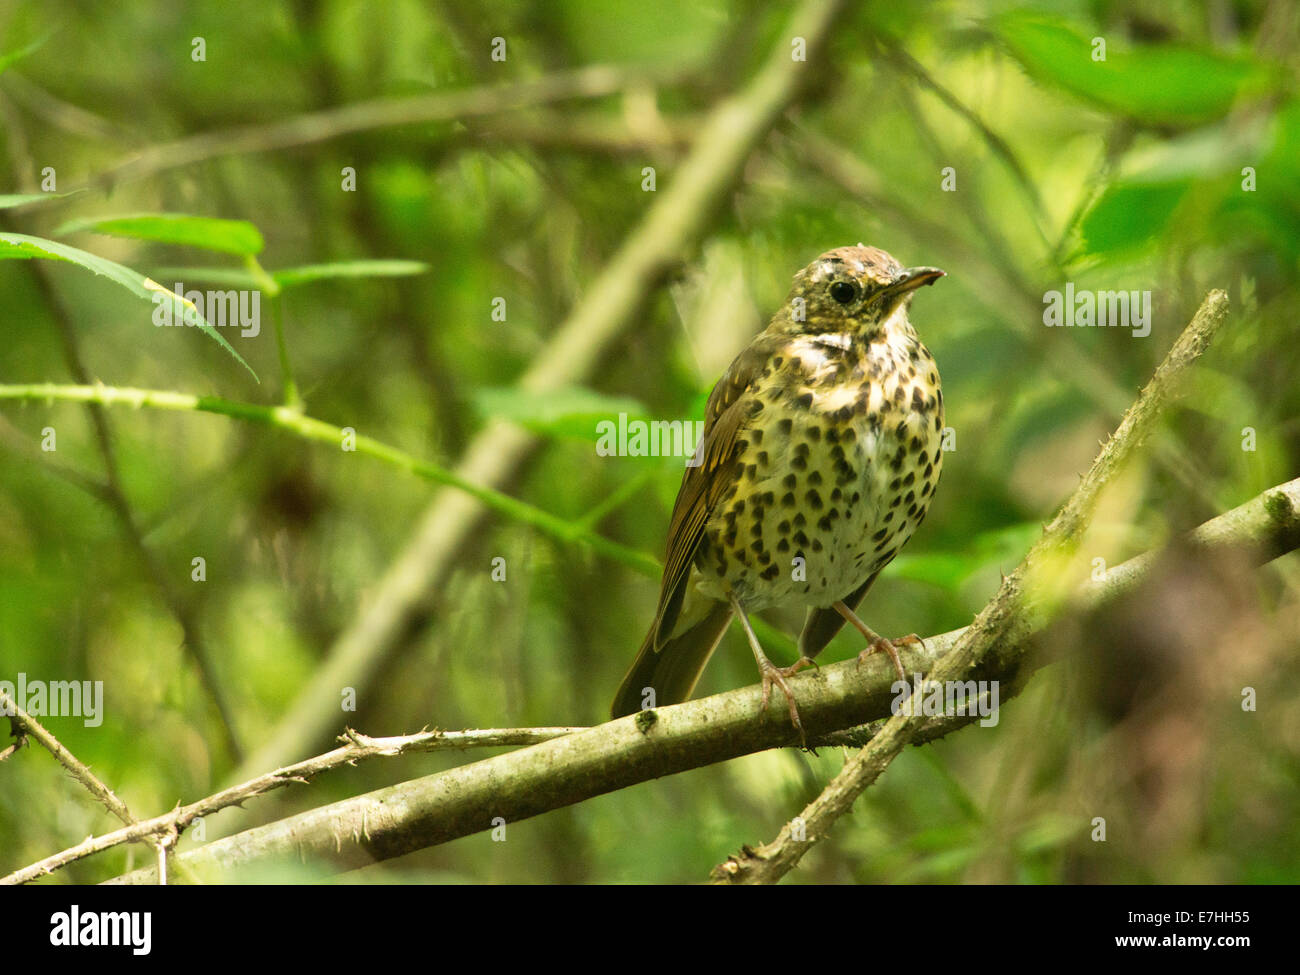 Song Thrush (Turdus philomelos) a woodland bird with a distinctive song, sitting on a branch in woodland. Stock Photo